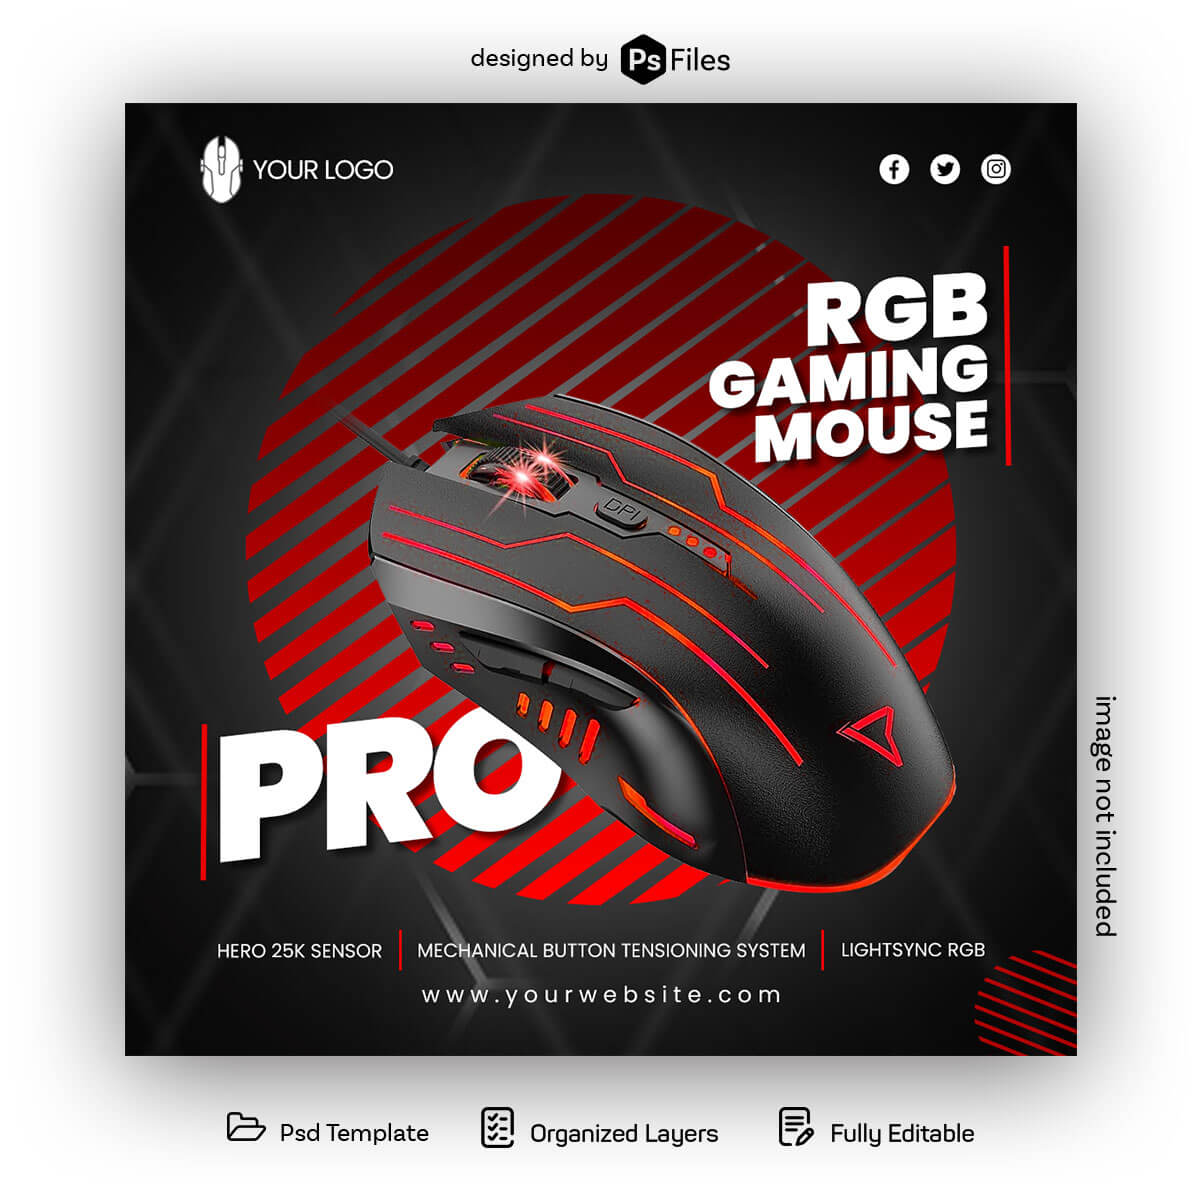 Gaming Mouse Social Media Post Design Free PSD Template